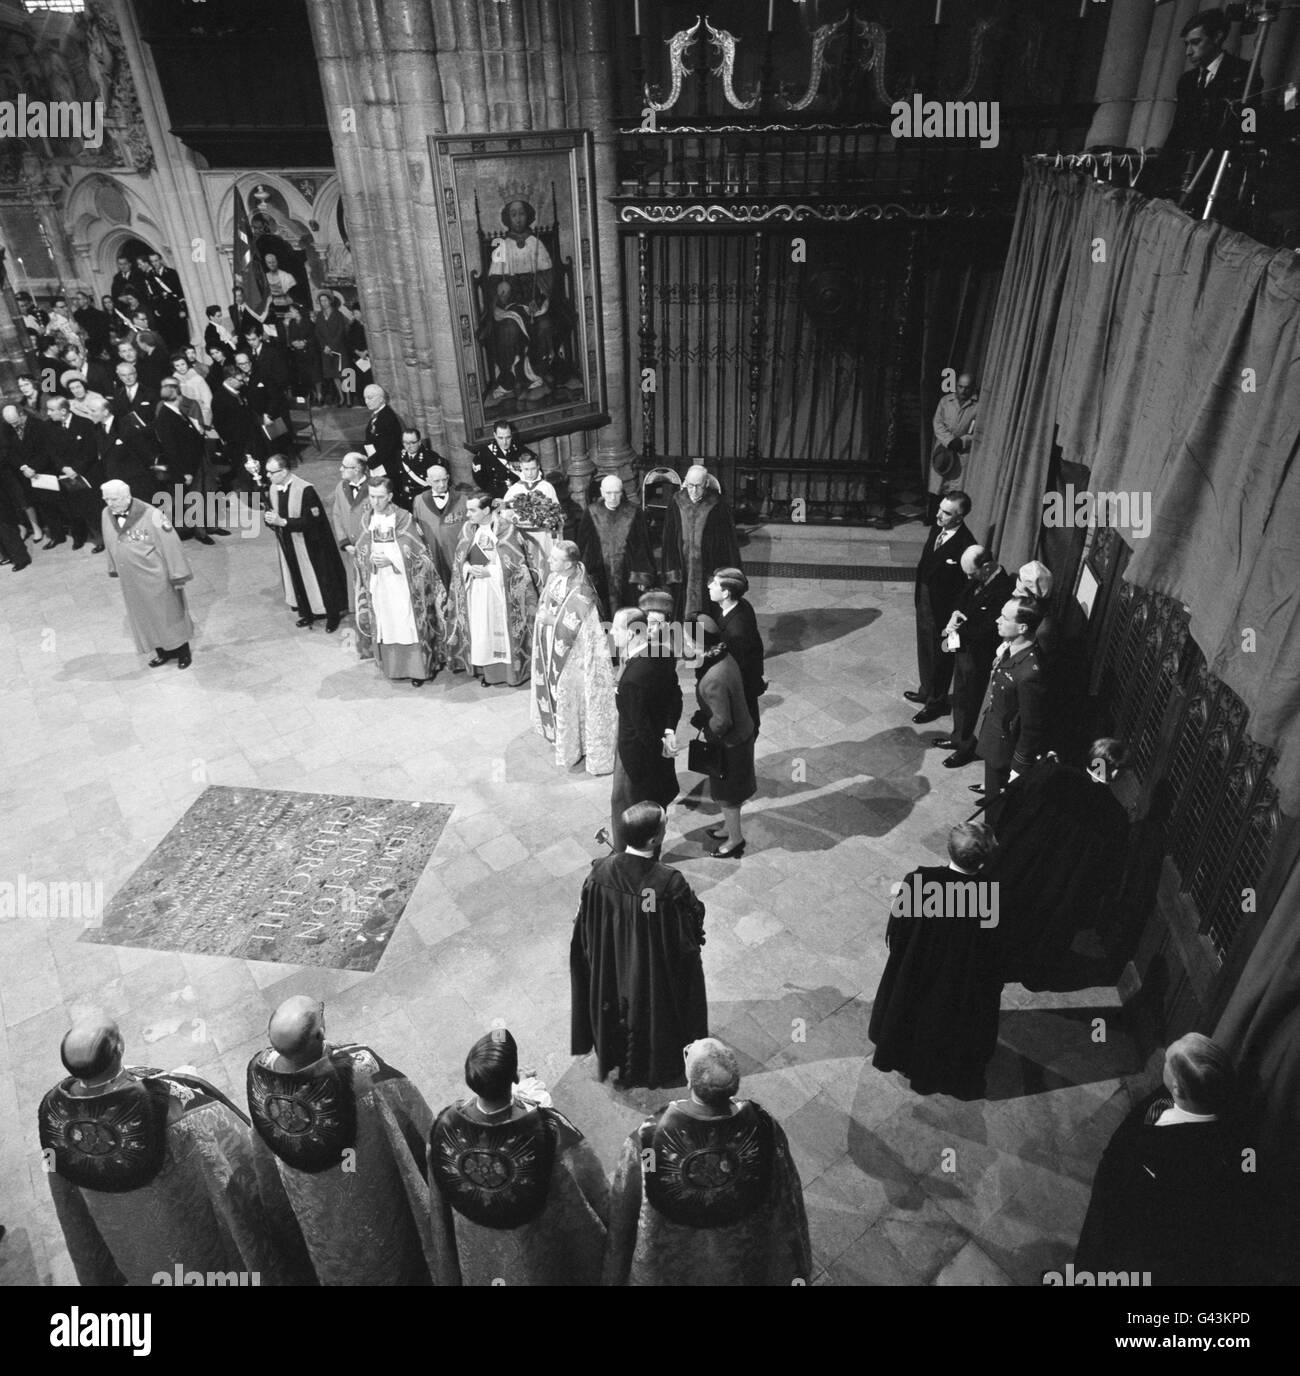 The Queen, Duke of Edinburgh, the Prince of Wales and Princess Anne near the memorial stone to Sir Winston Churchill in Westminster Abbe, as they were about the make their way in procession through the Nave and Choir to the Chapel of St Edward the Confessor where they celebrated the nonocentenary year of the consecration of the Abbey. Stock Photo